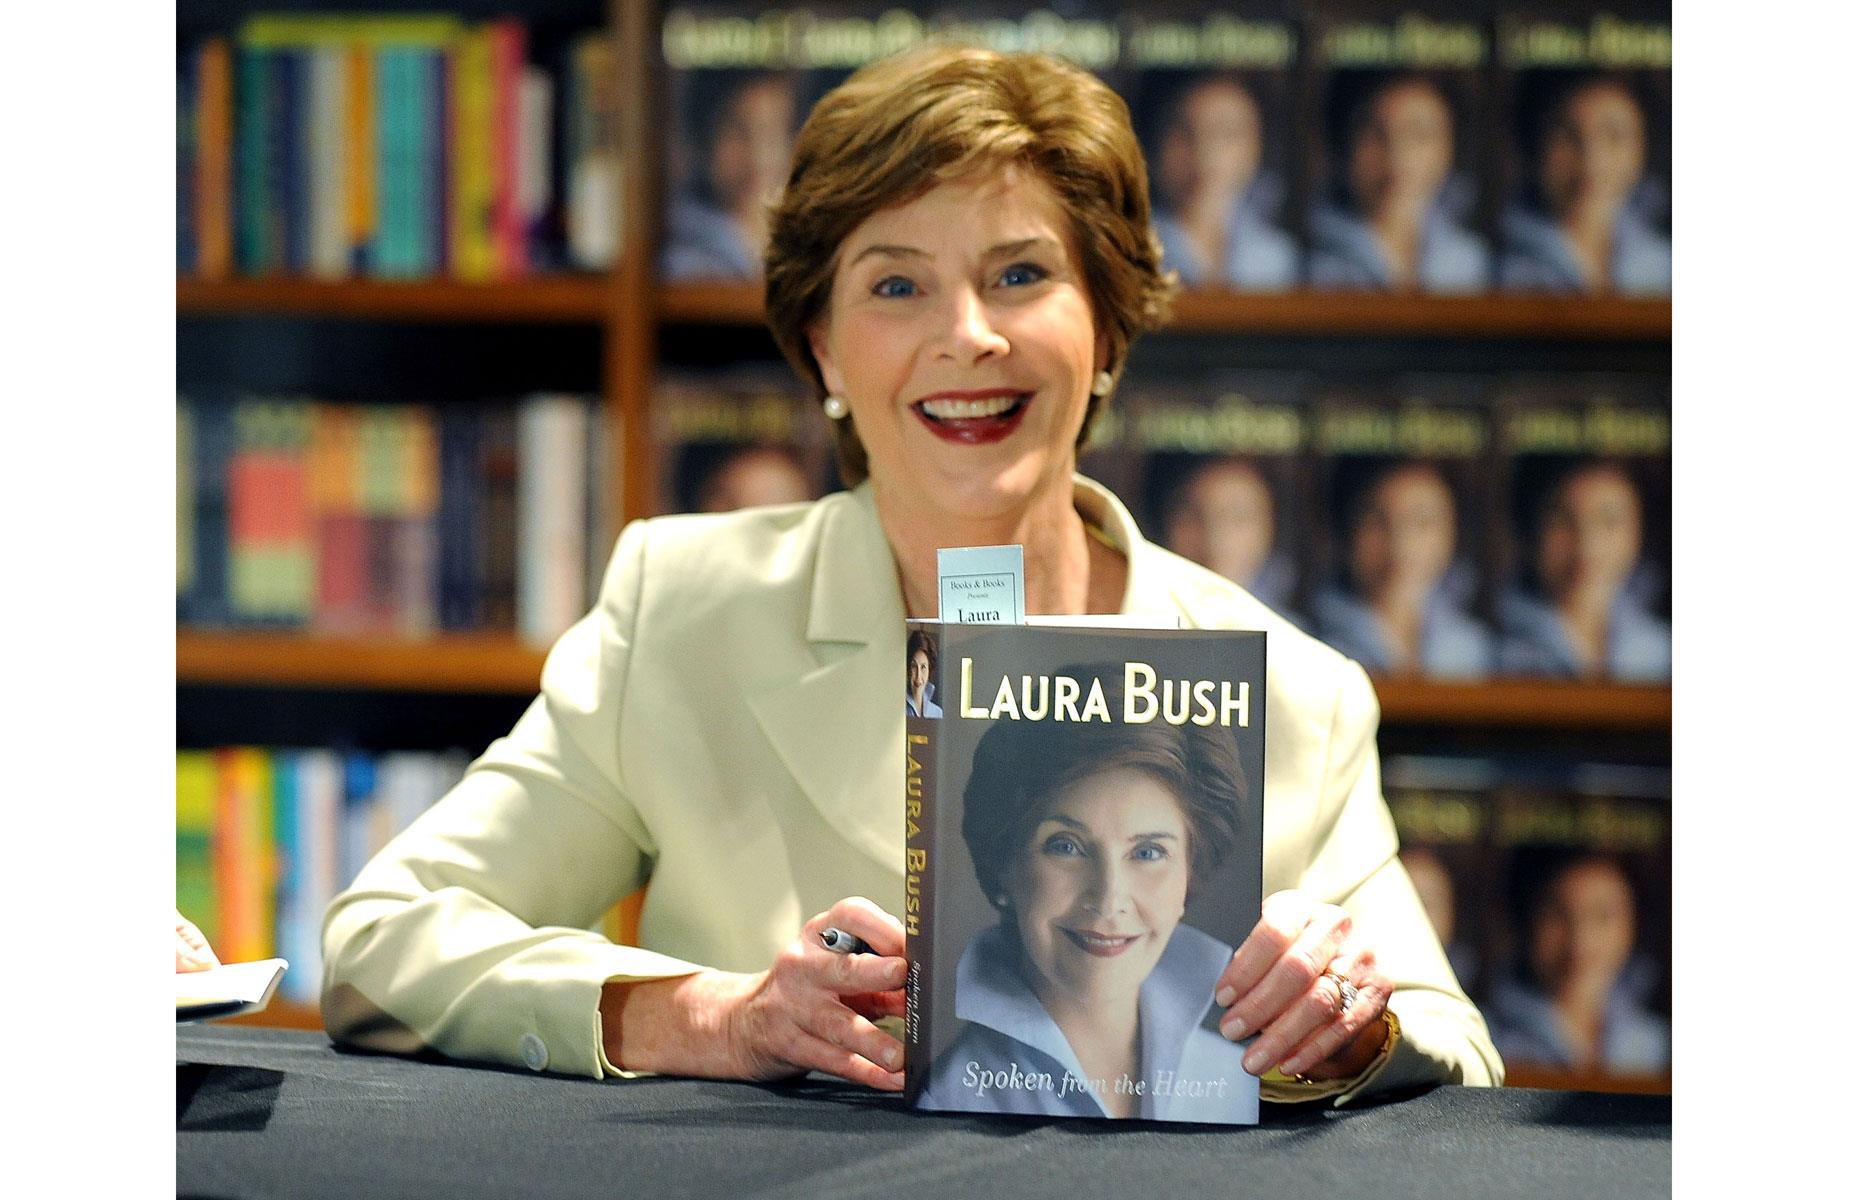 <p>Pinning down a reliable approximation of Laura Bush's wealth is tricky, as estimates online vary wildly.</p>  <p>What <em>is</em> known for sure is that Laura has earned an incredible sum of money since she left the White House in 2009, with the after-dinner speech circuit proving particularly lucrative for the wife of former US president George W Bush. </p>  <p>Laura also received a multimillion-dollar advance for her 2010 autobiography <em>Spoken from the Heart. </em></p>